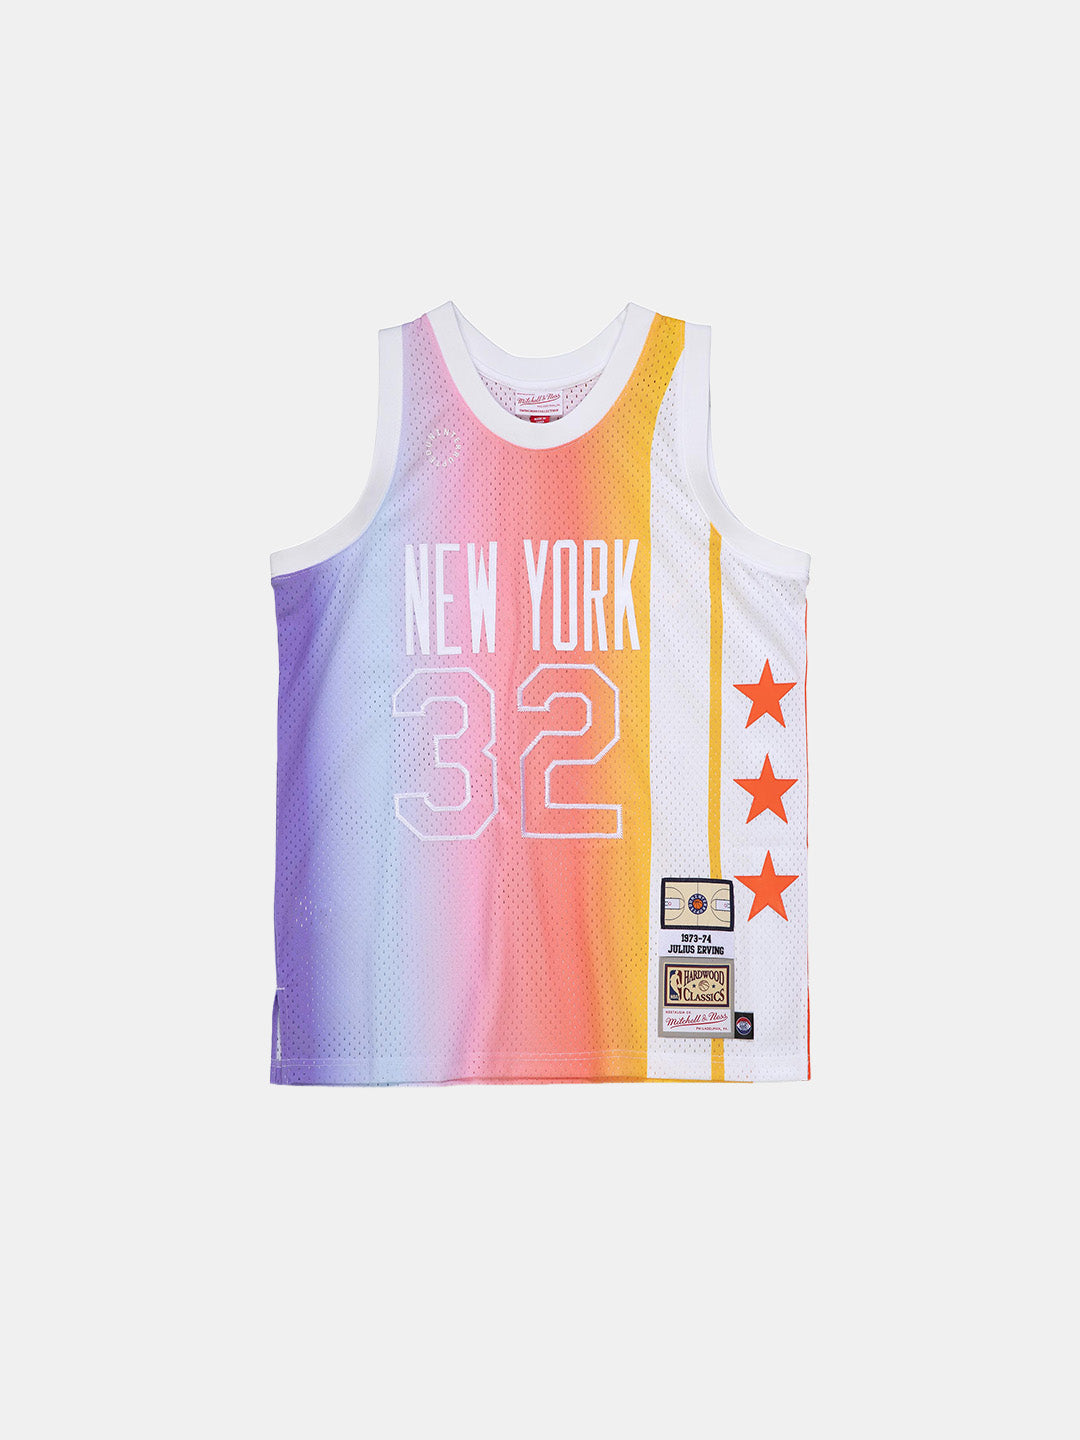 UNINTERRUPTED X Mitchell & Ness Legends Jersey Nets - front of multicolor jersey